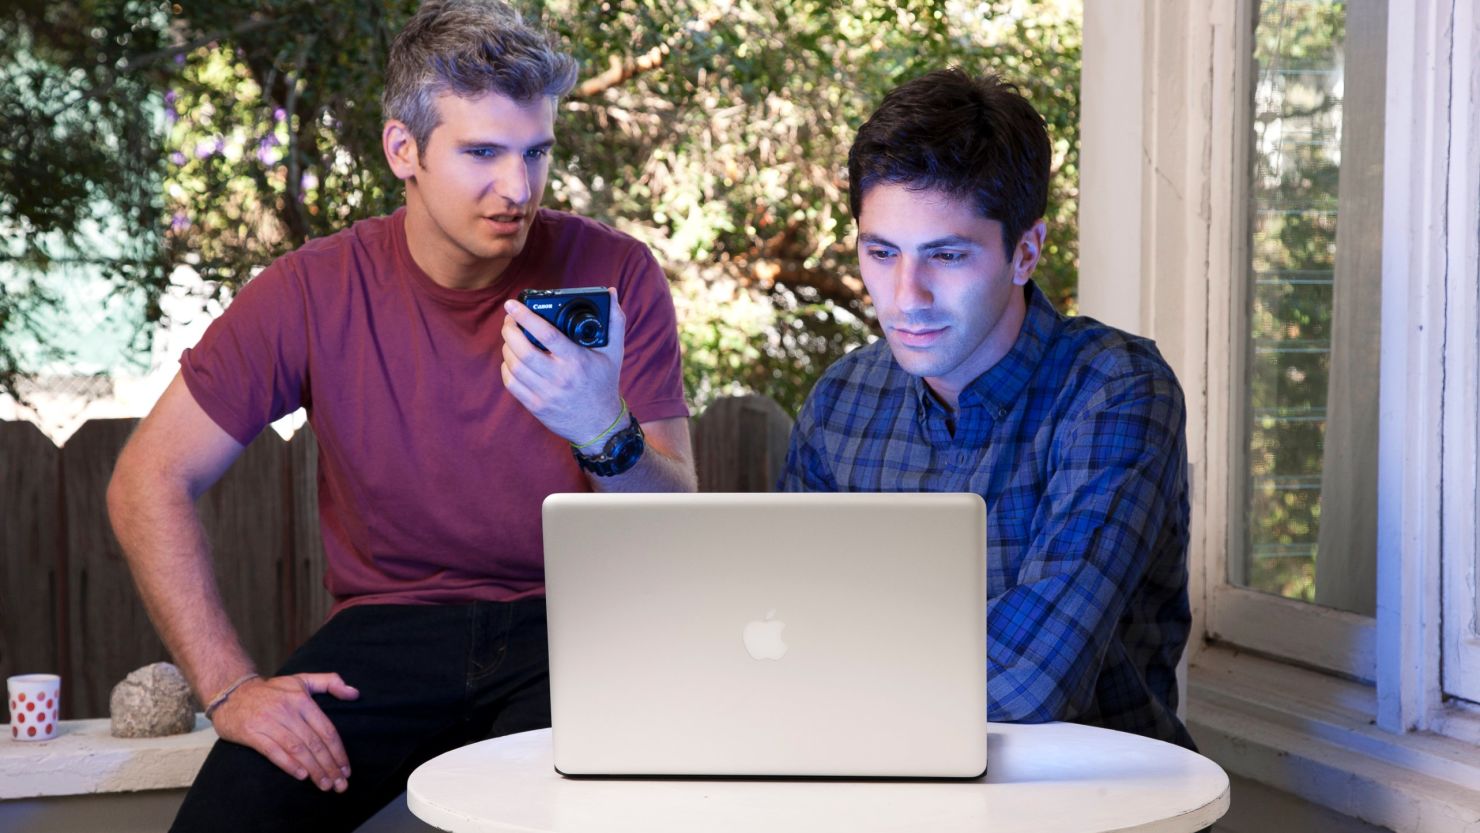 Max Joseph, left, and Nev Schulman from the MTV television show "Catfish," which looks at online relationships.